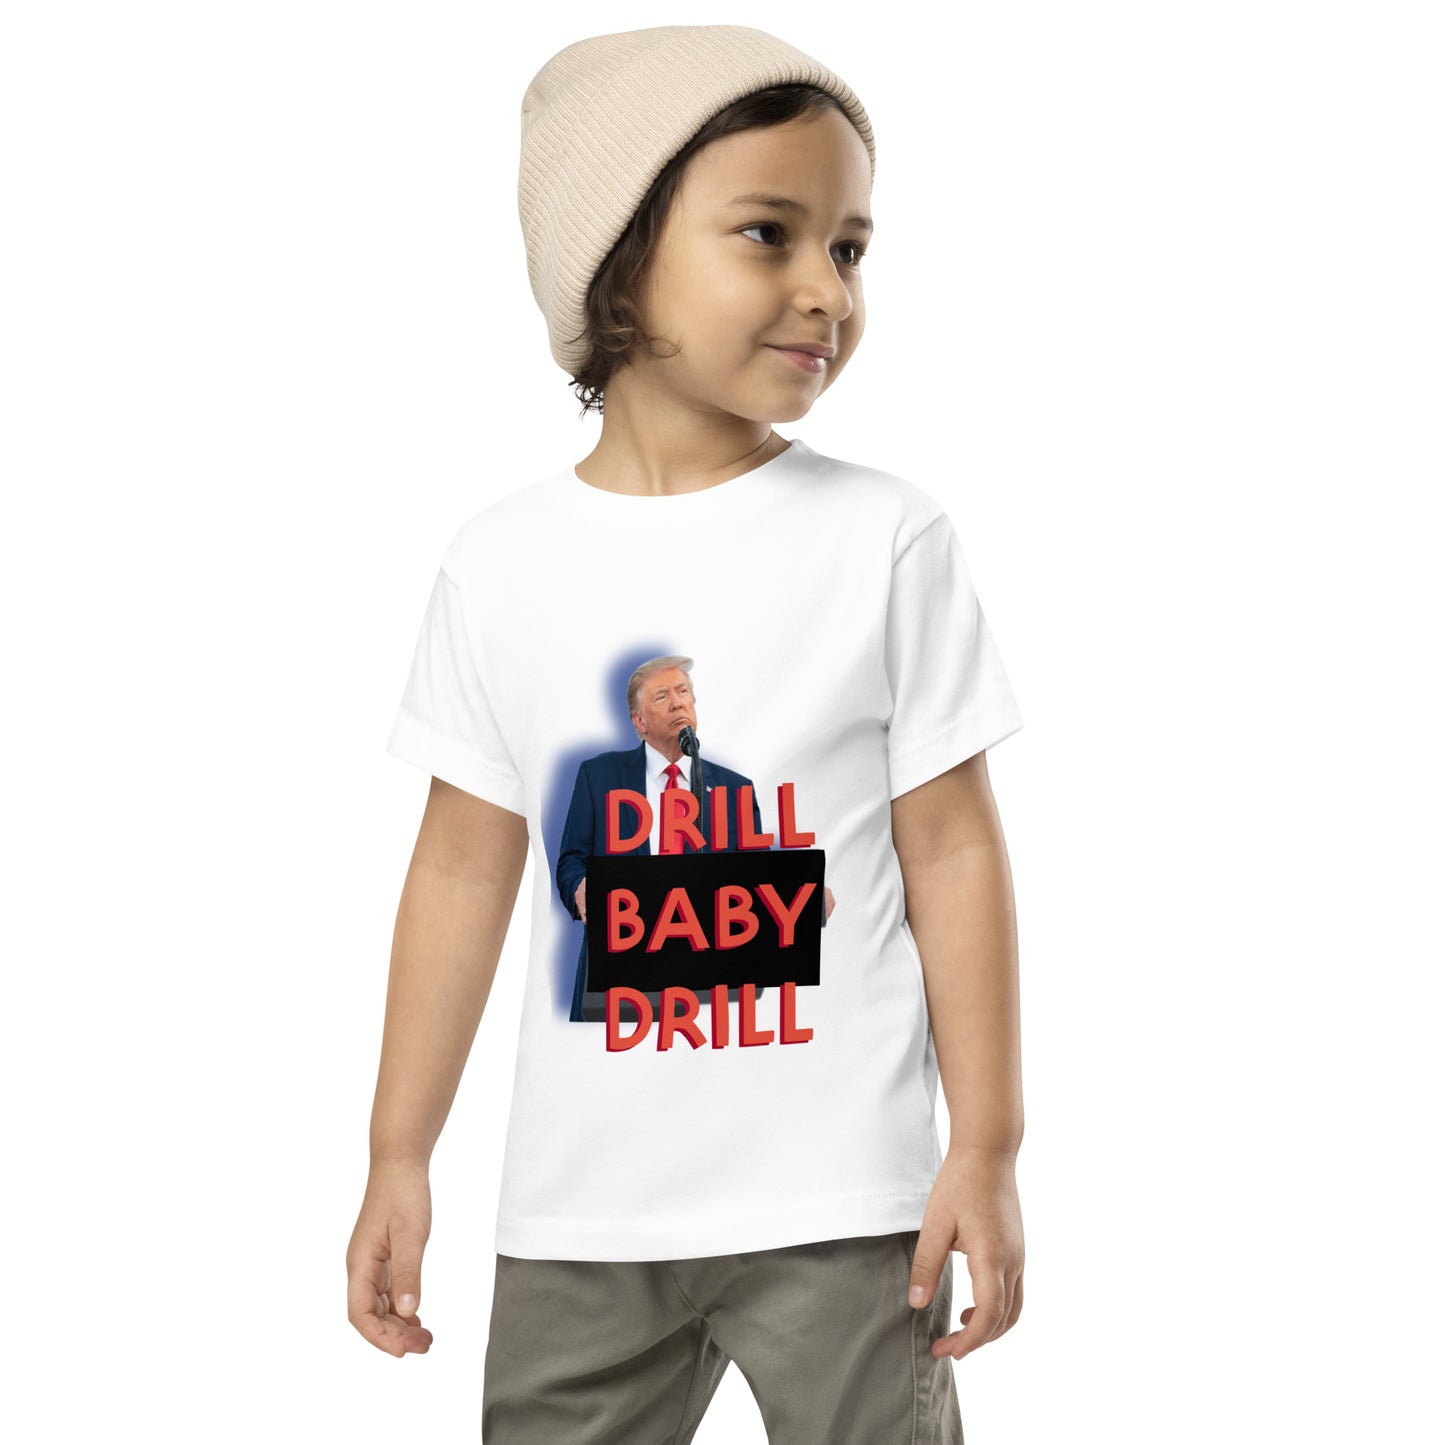 DRILL BABY DRILL Toddler Short Sleeve Tee